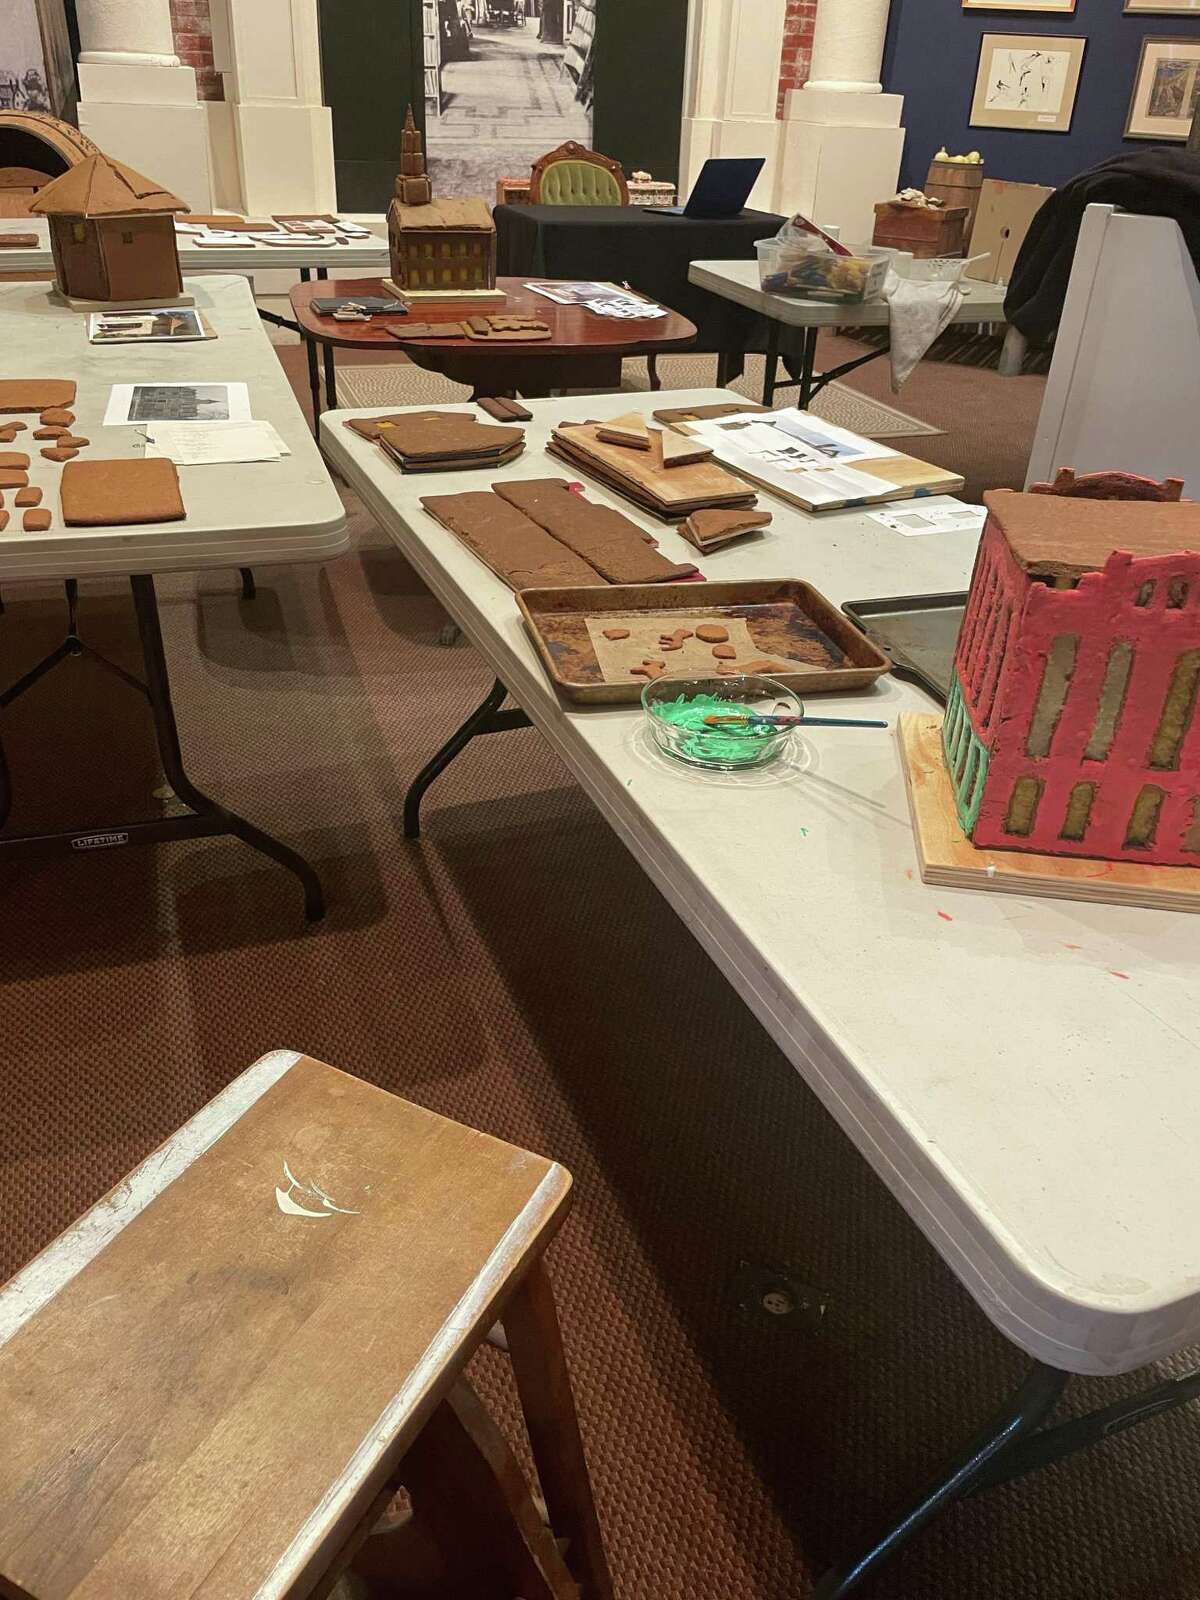 Westport’s Museum for History and Culture creates new gingerbread exhibit to show the history of the town.